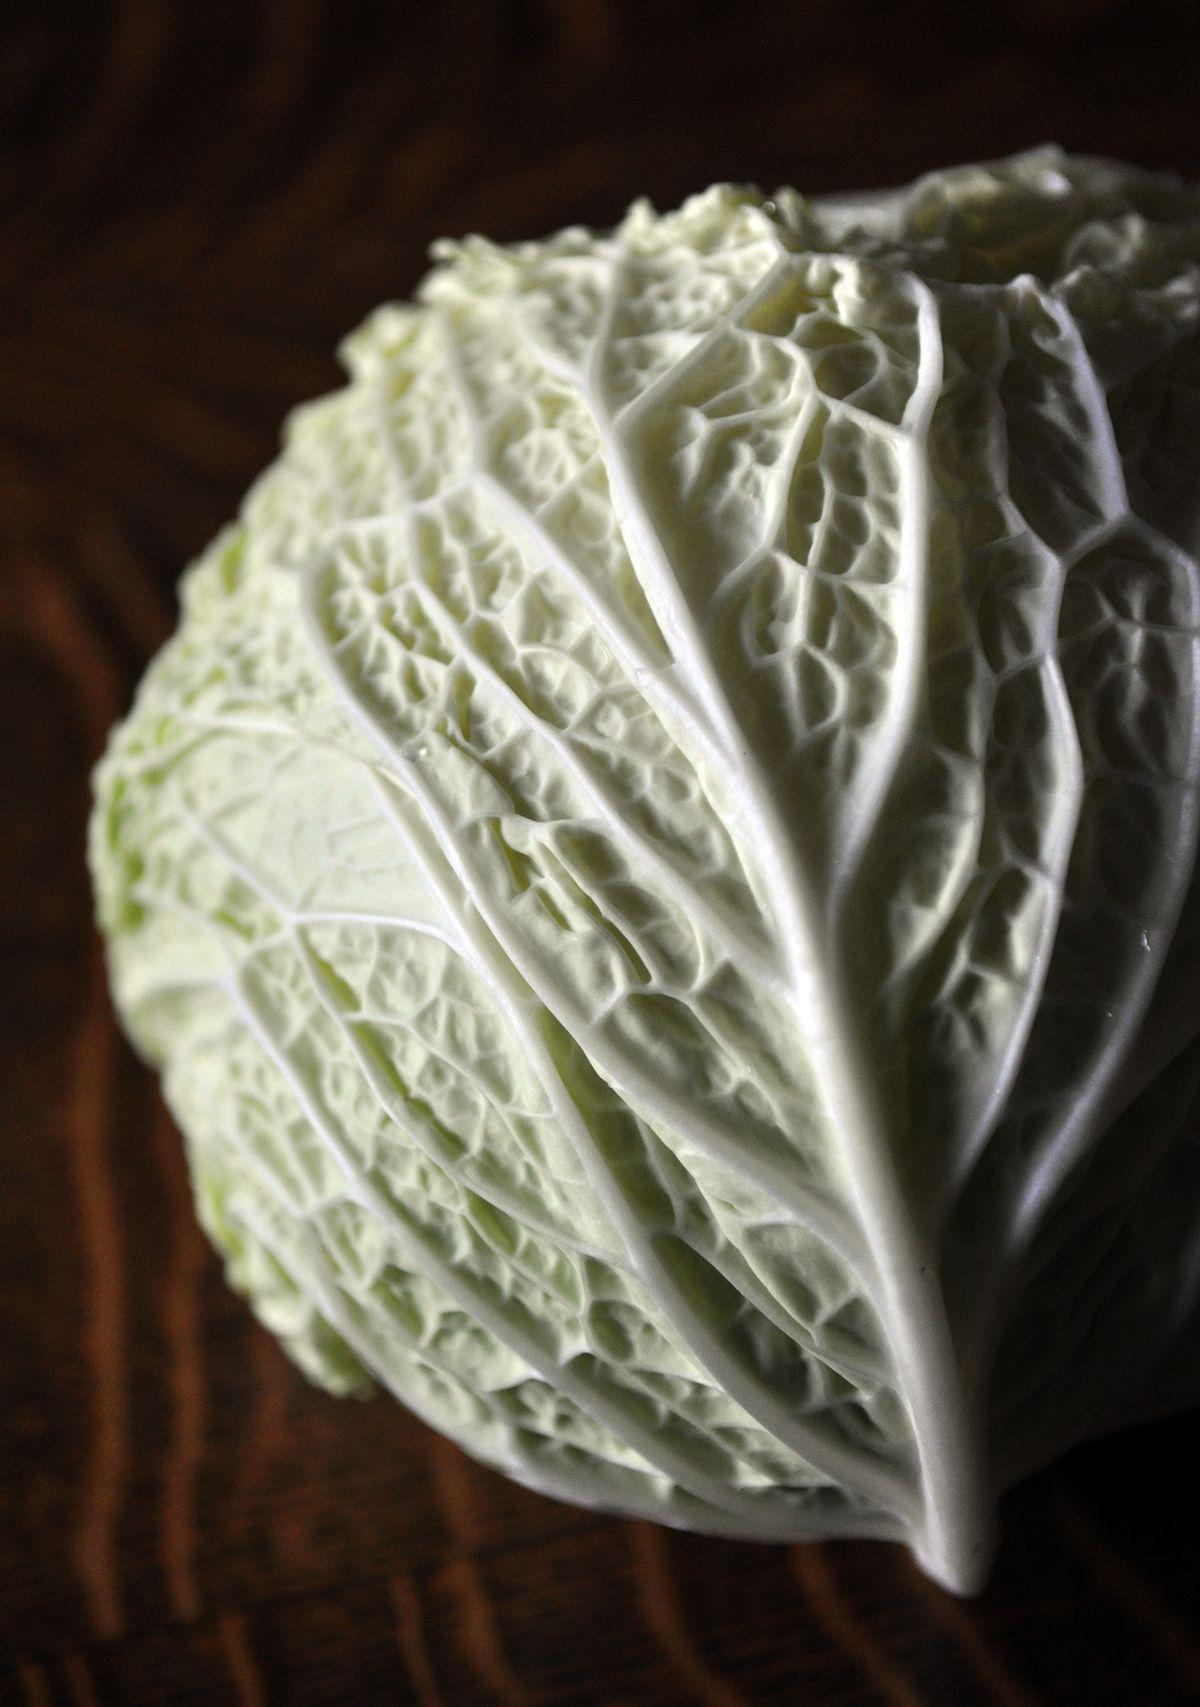 St. Patrick’s Day, which arrives next week, always puts the spotlight on cabbage. (Adriana Janovich)